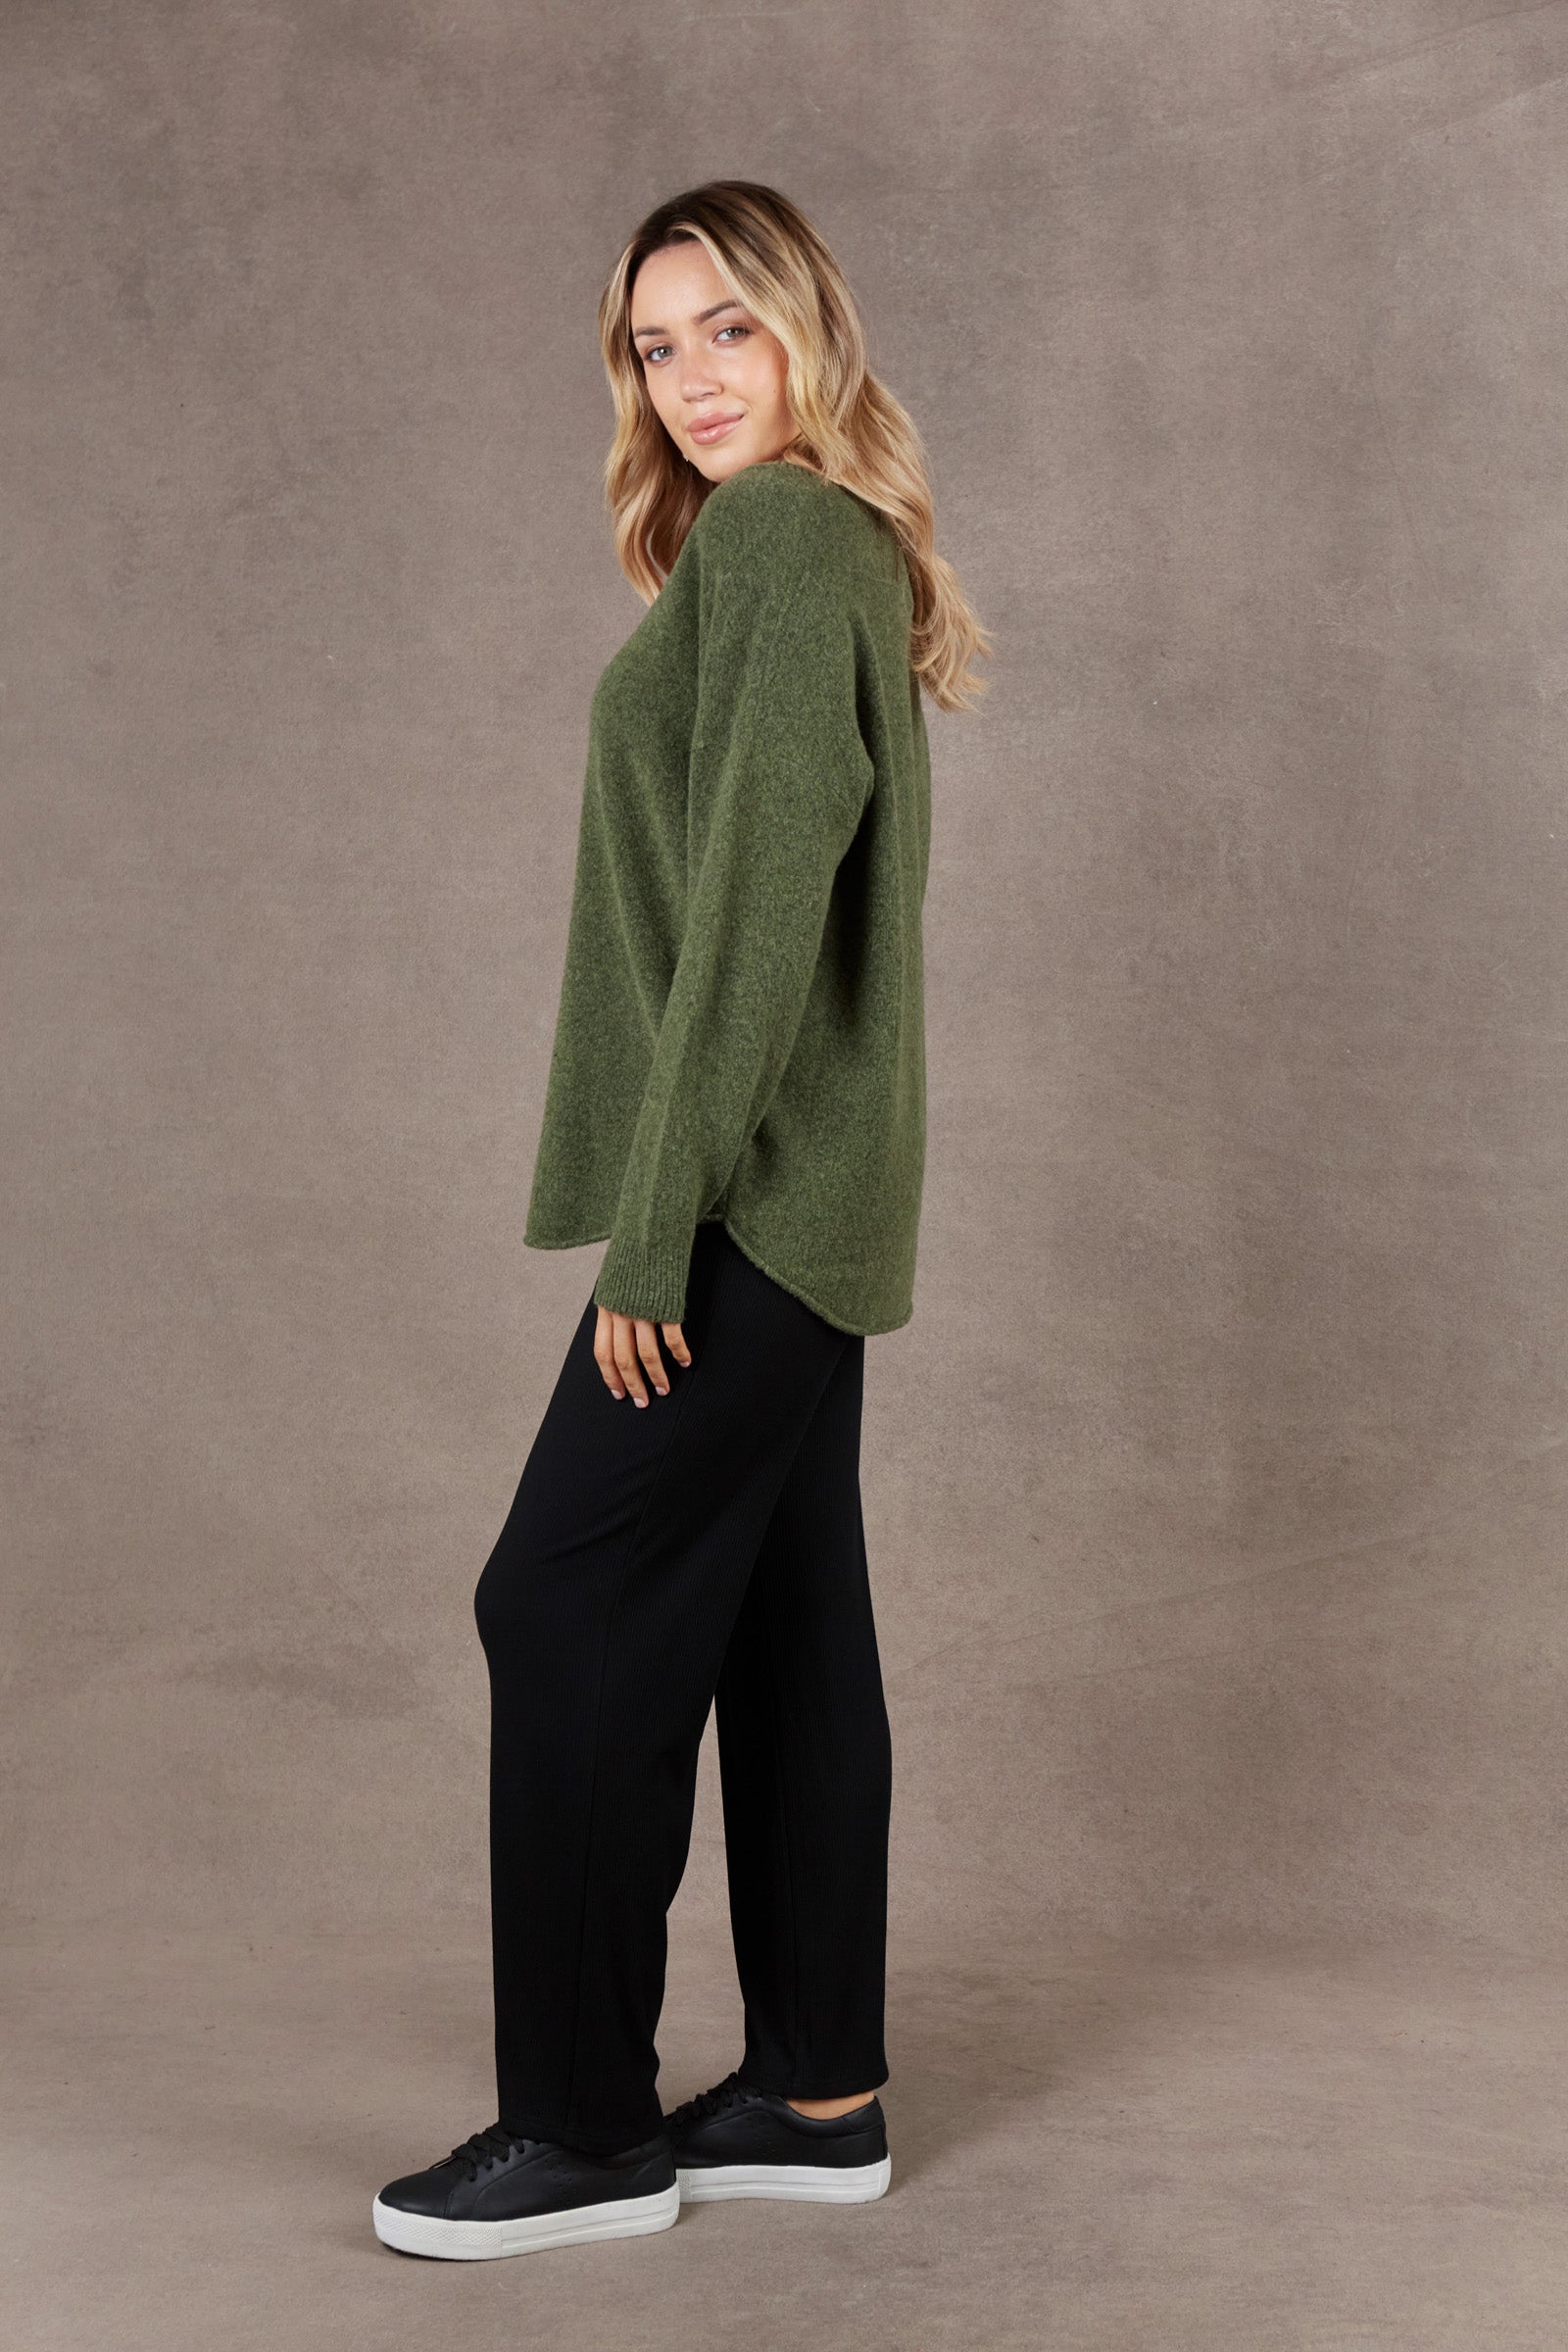 Paarl Knit - Moss - eb&ive Clothing - Knit Jumper